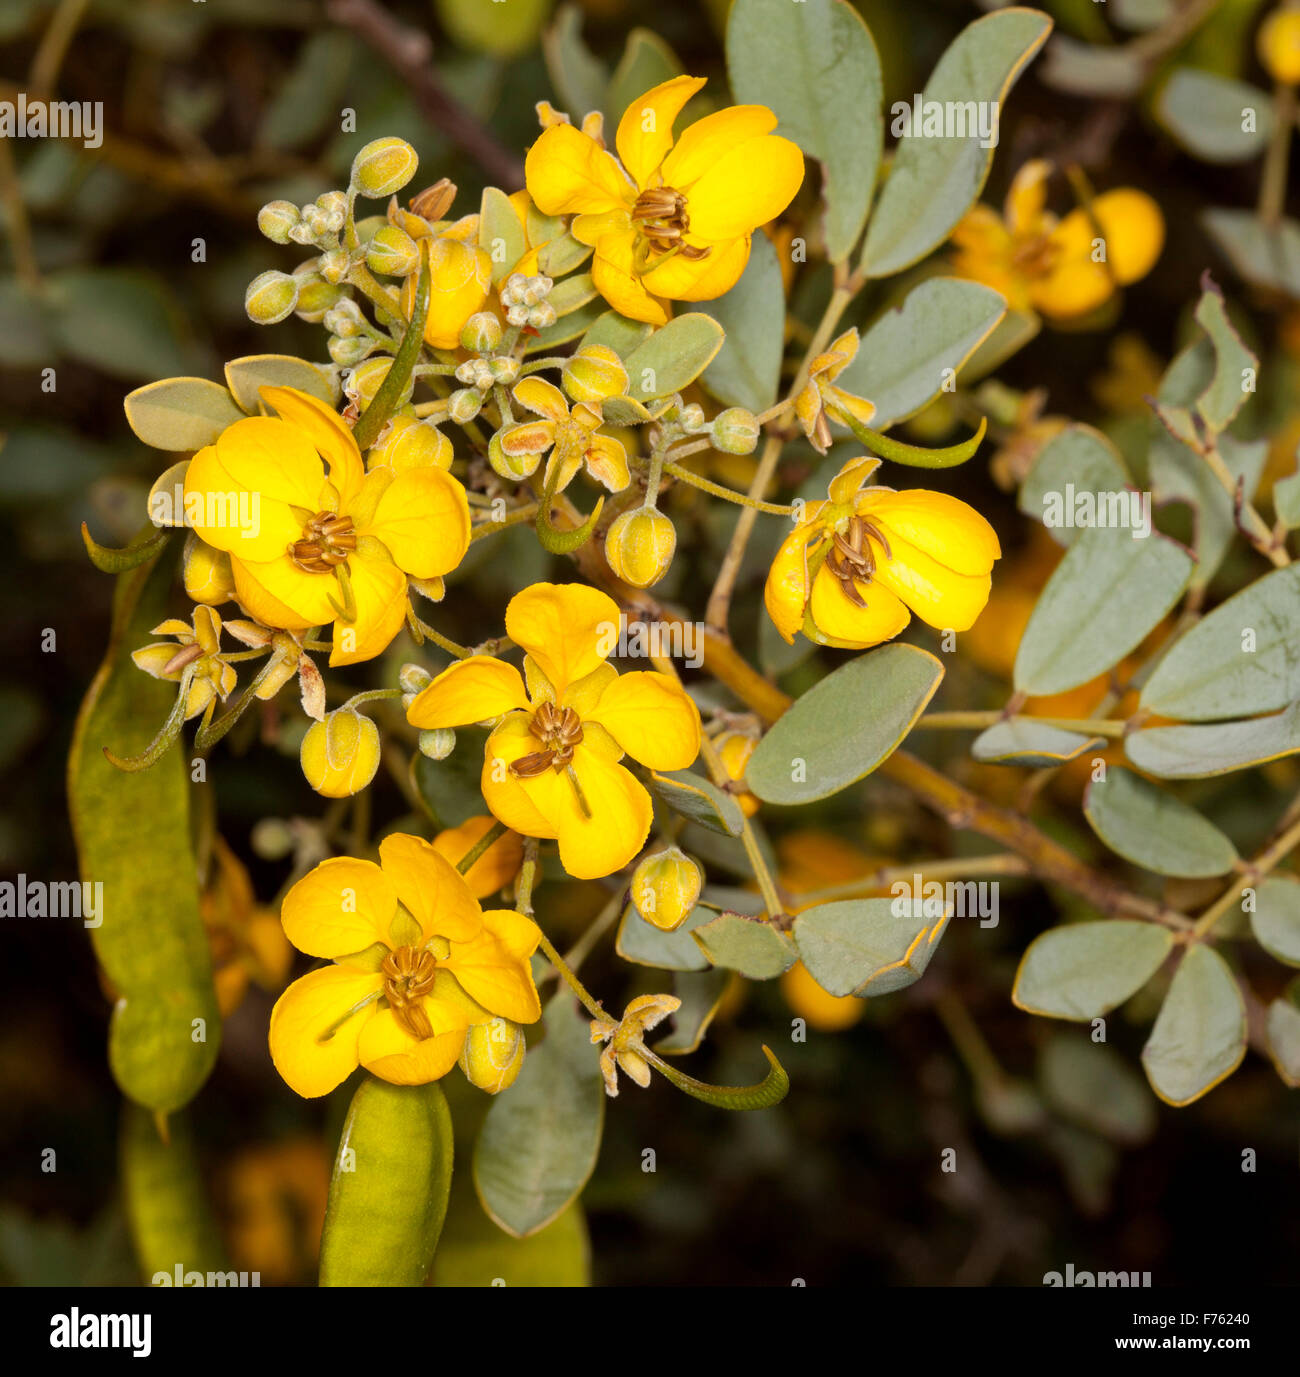 Yellow flowers, grey green leaves & seed pods of Senna artemisioides subsp. helmsii, blunt-leaved cassia, syn. Cassia helmsii in outback Australia Stock Photo